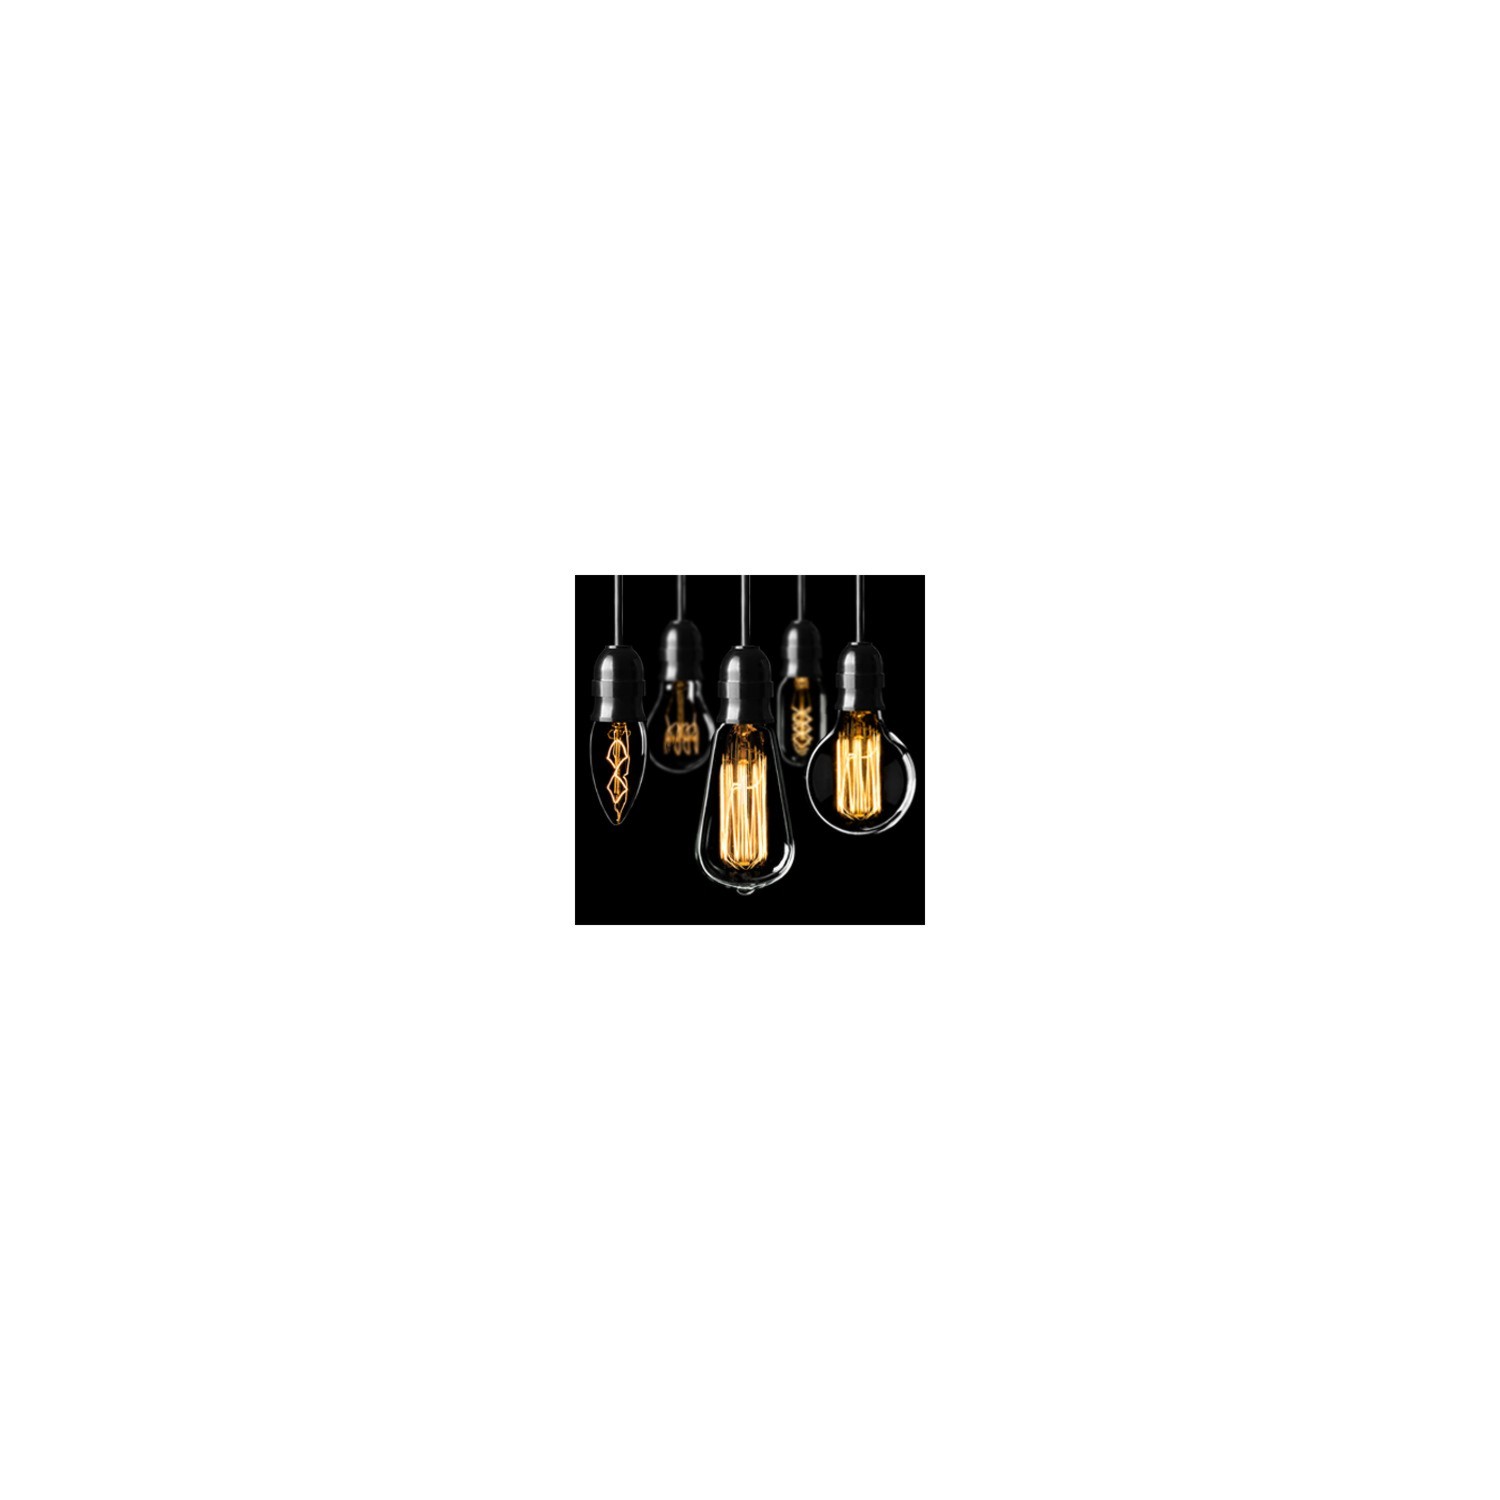 BC Antique Lamp Candle Dimmable Bulb - Warm White Image 2